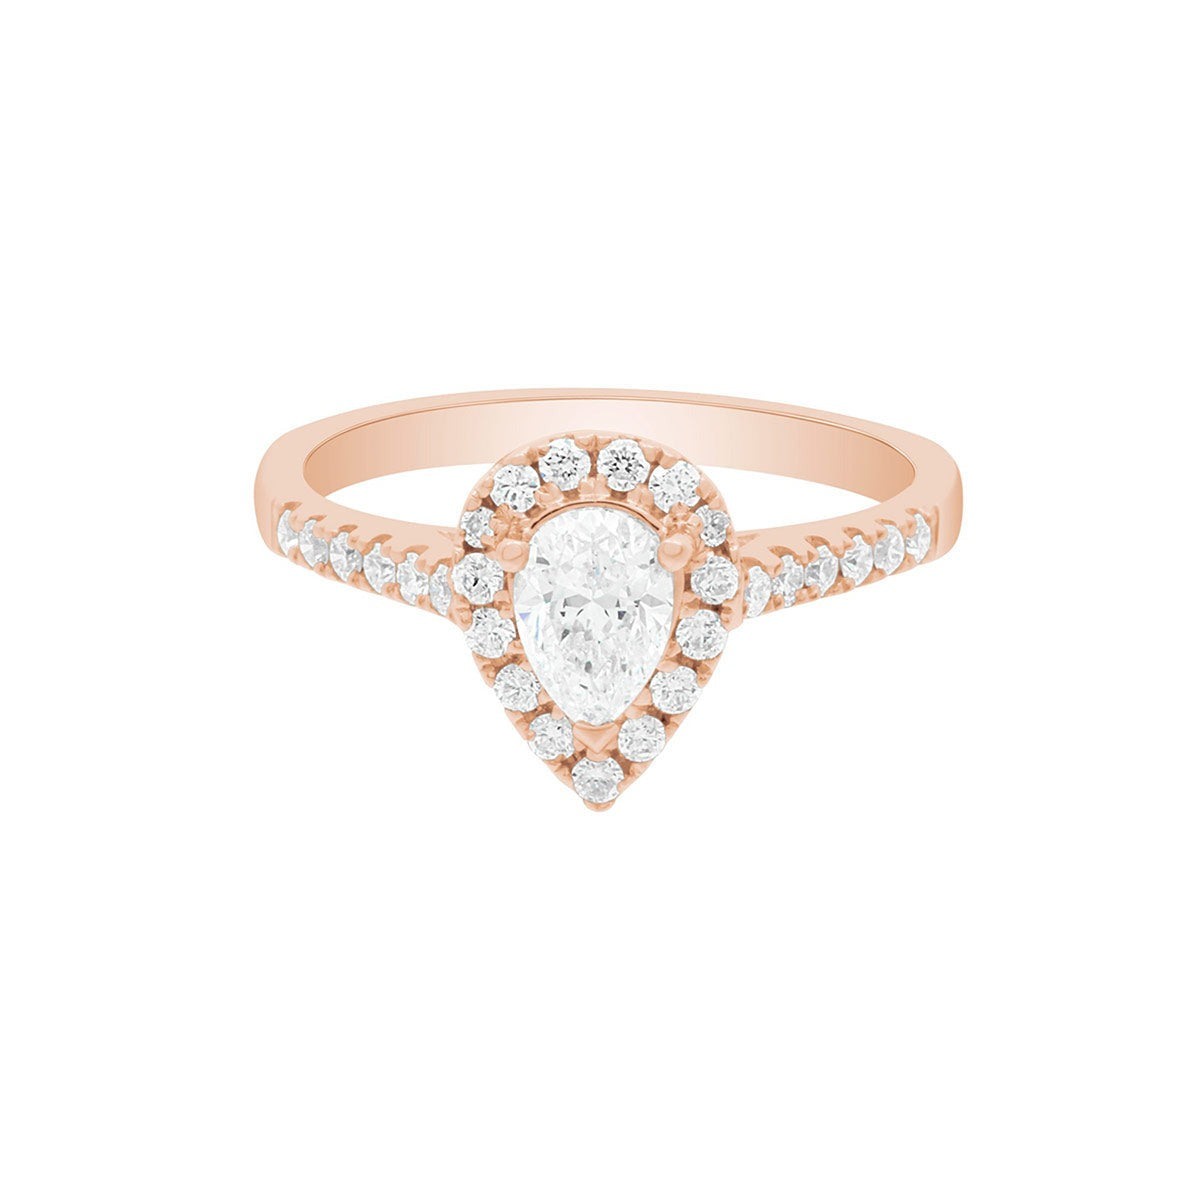 Pear Cut Halo Ring in rose gold, laying flat on A WHITE SURFACE WITH A WHITE BACKGROUND